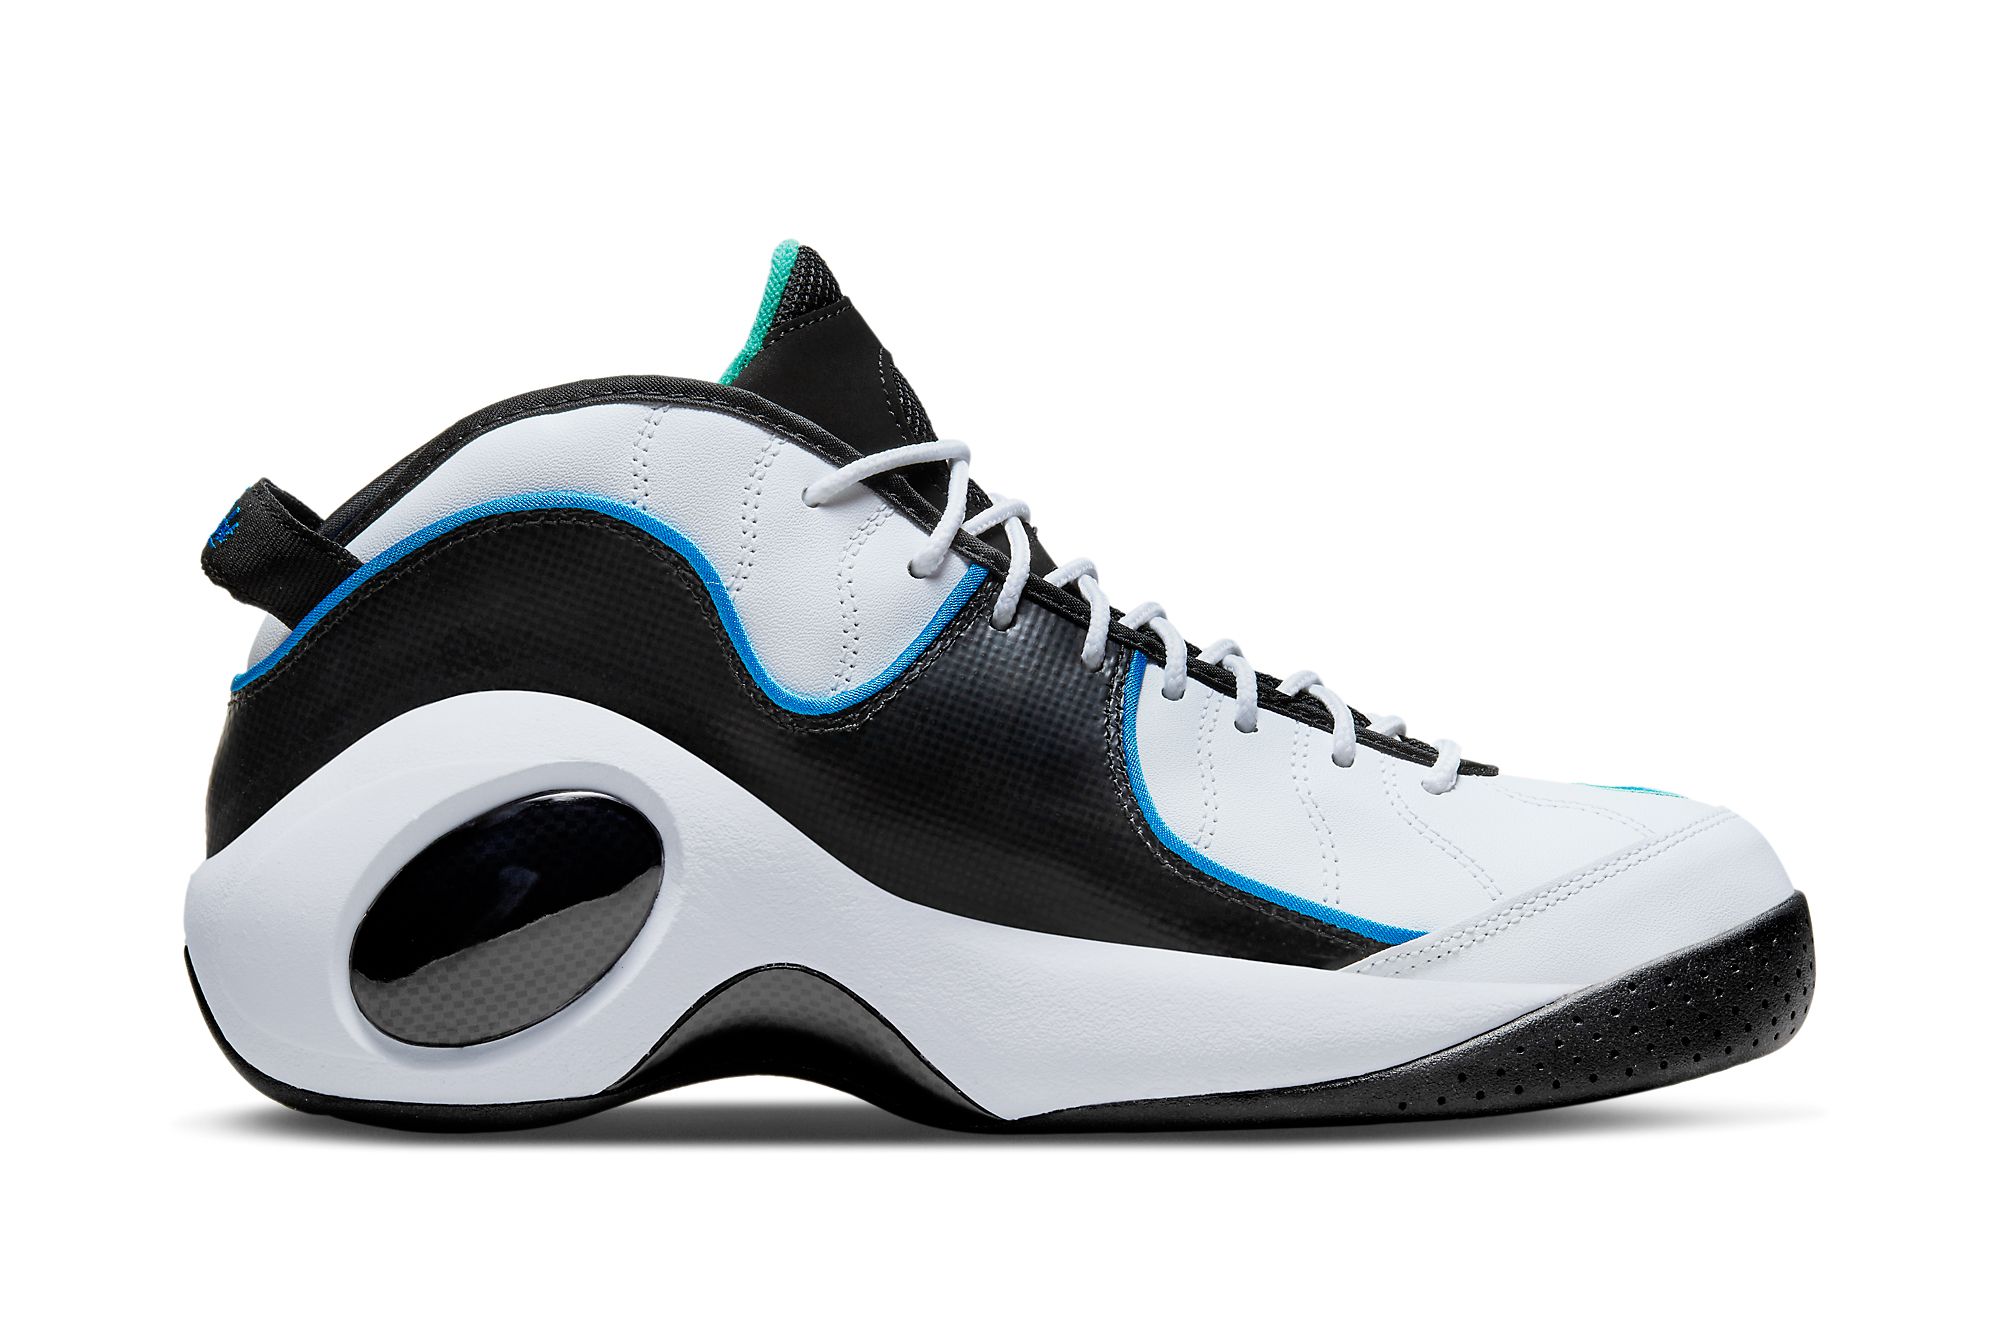 This New Nike Air Zoom Flight 95 Draws Inspiration From a Jason